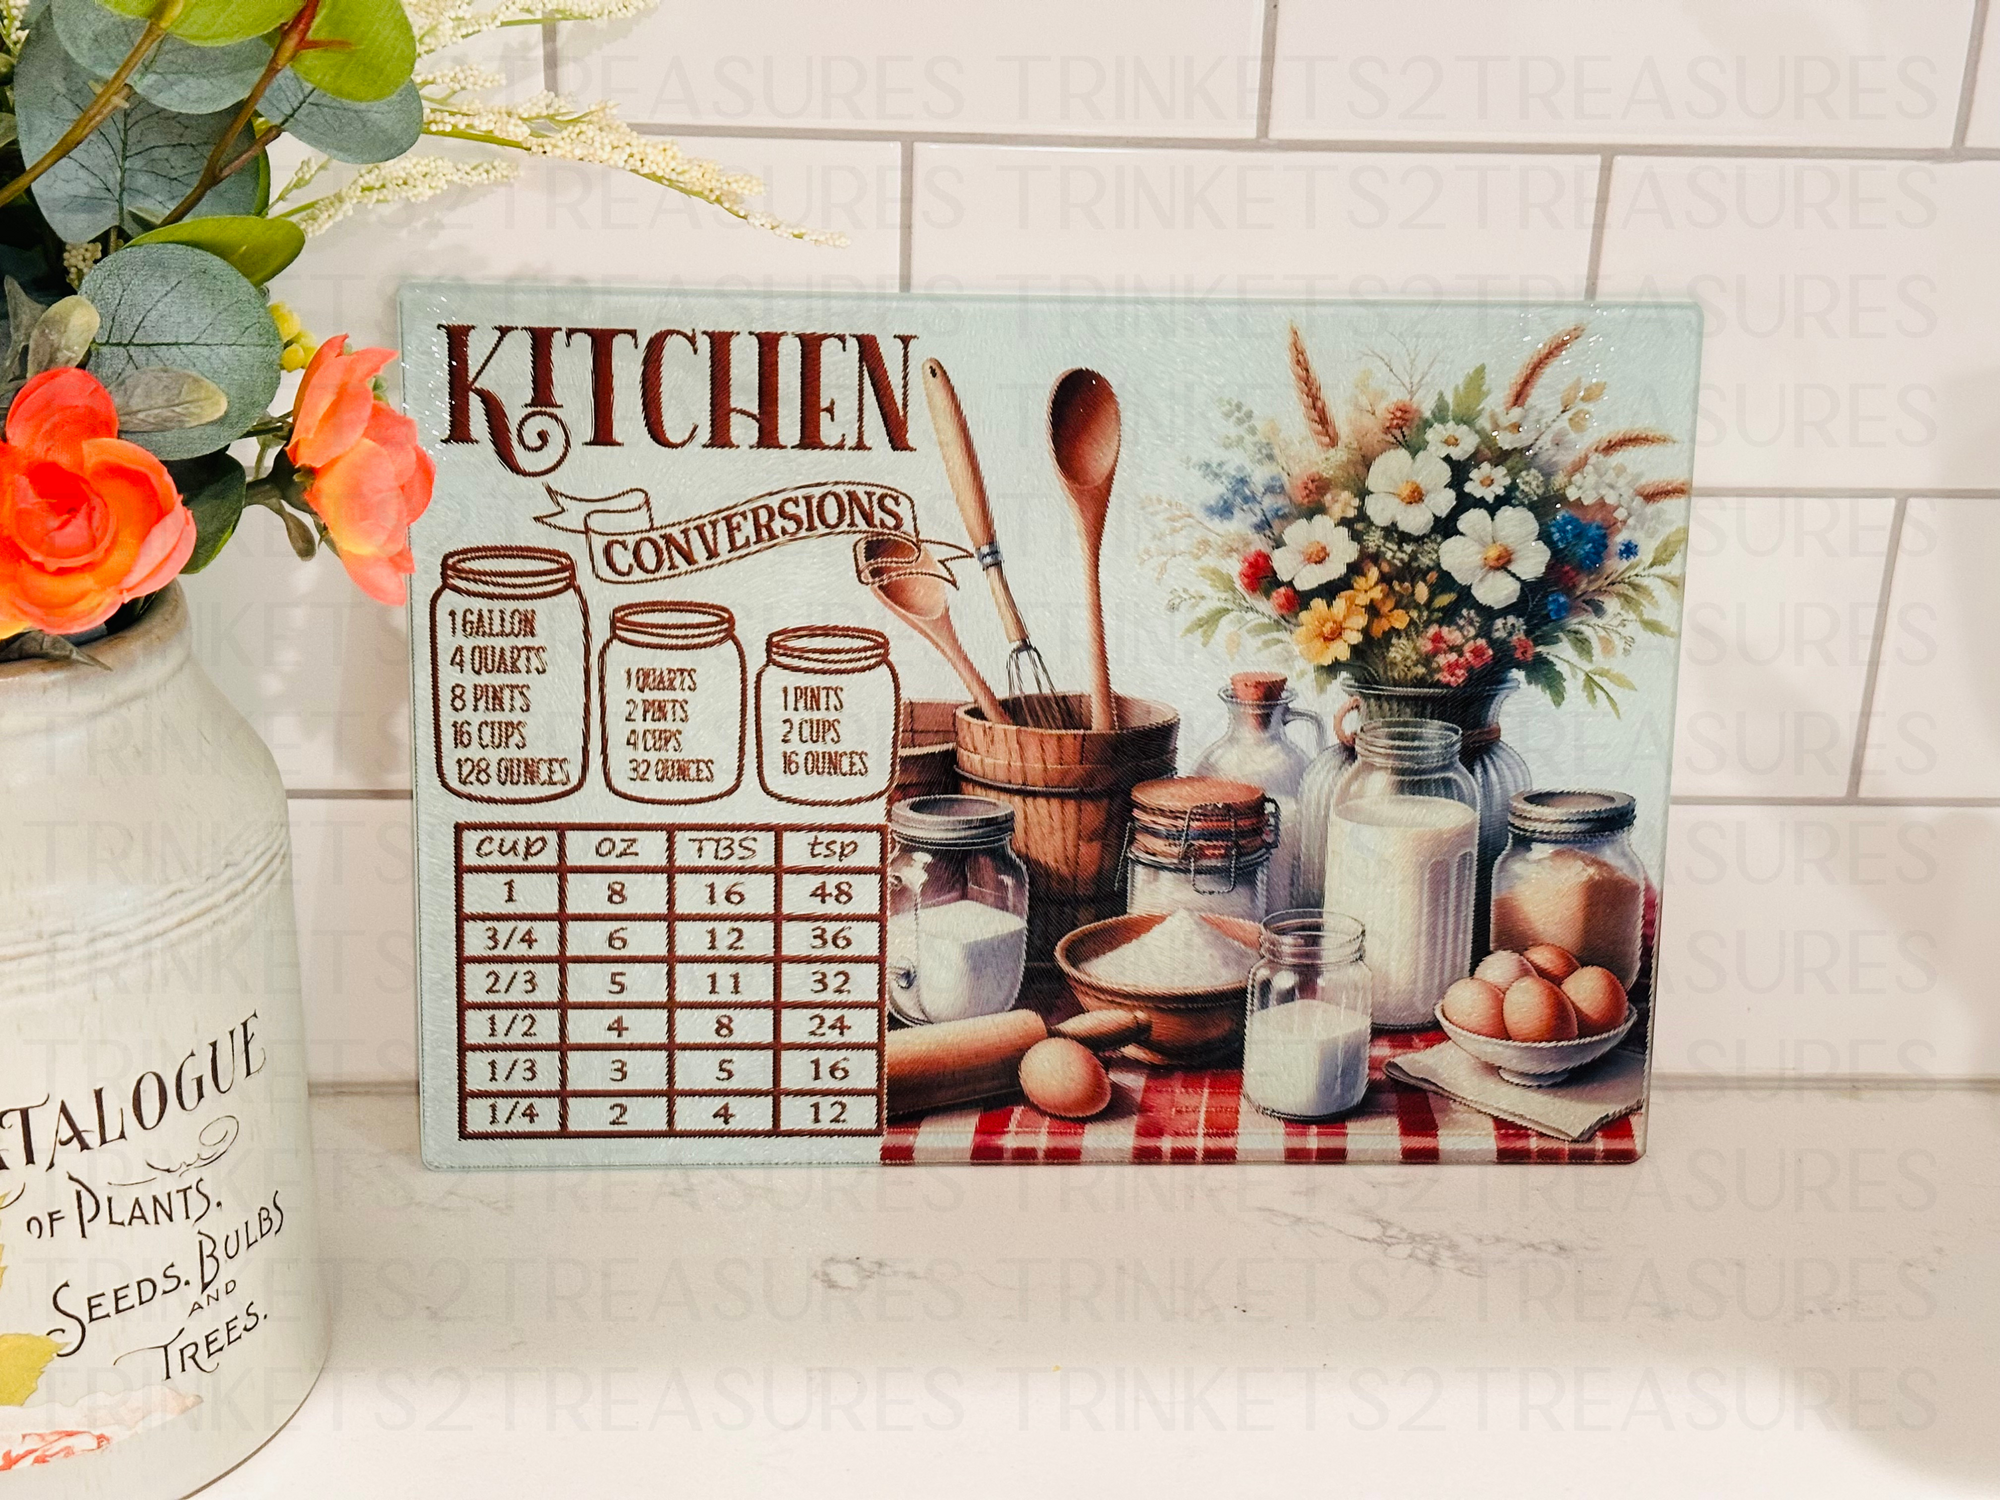 Personalized 8" x 11" Textured & Tempered Glass Cutting Board/Kitchen Conversions/Space Saving Kitchen Accessory/#605